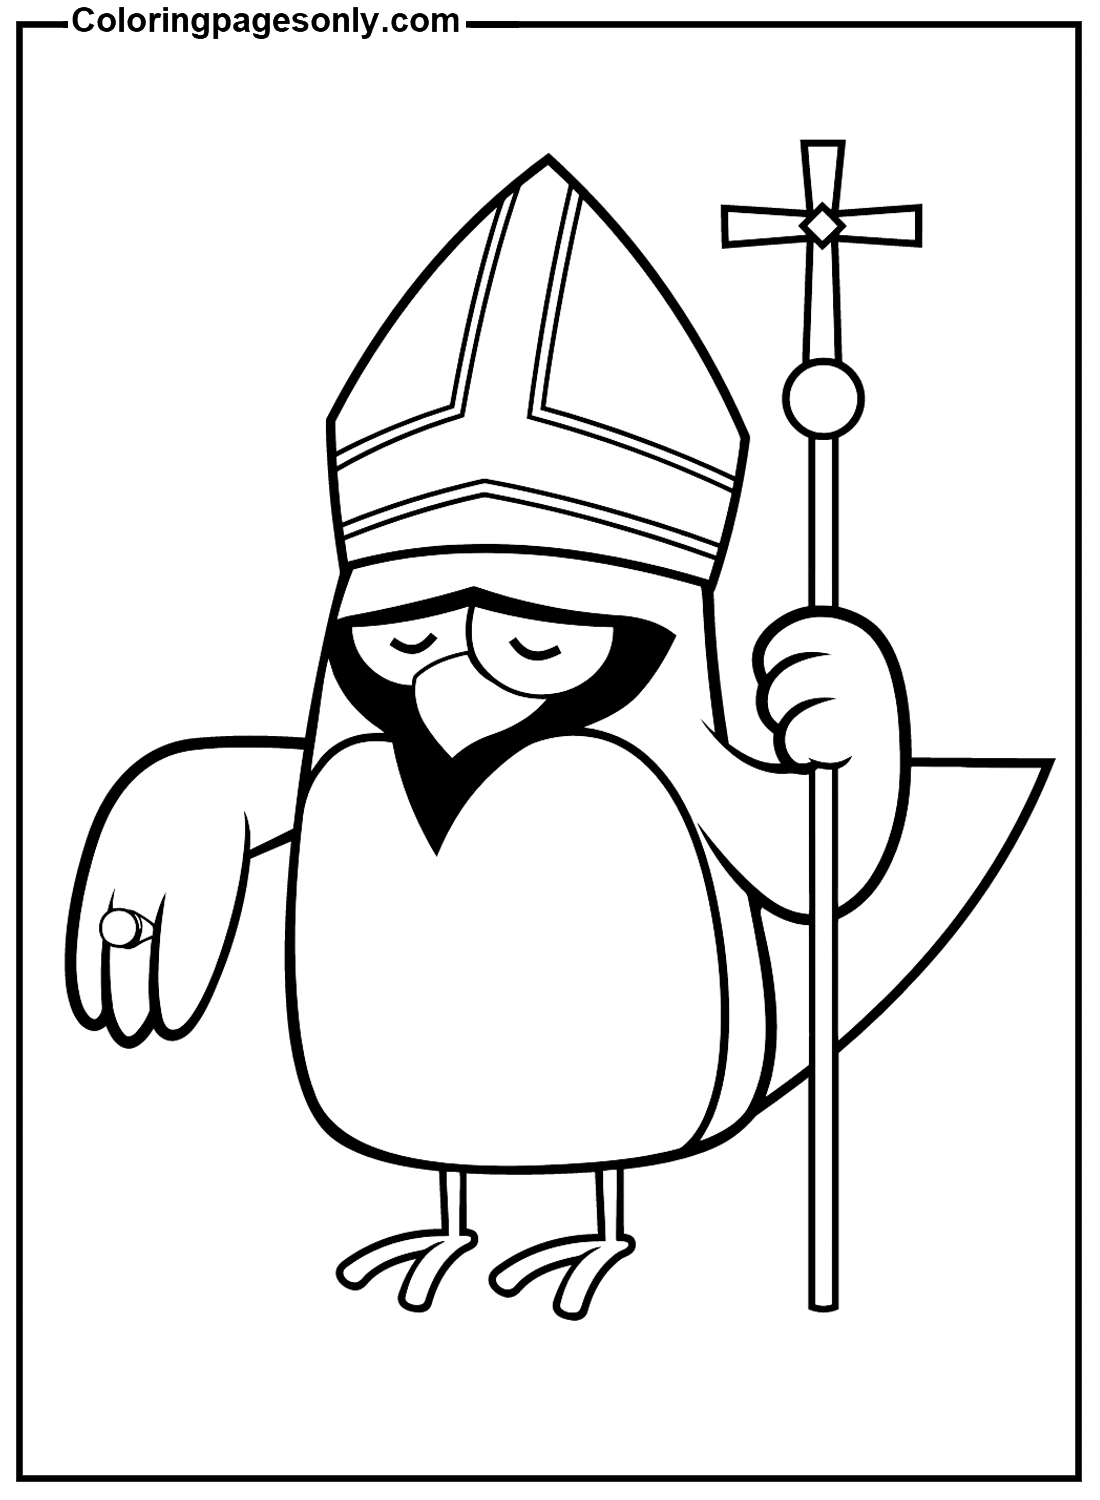 Funny Cardinal Coloring Pages